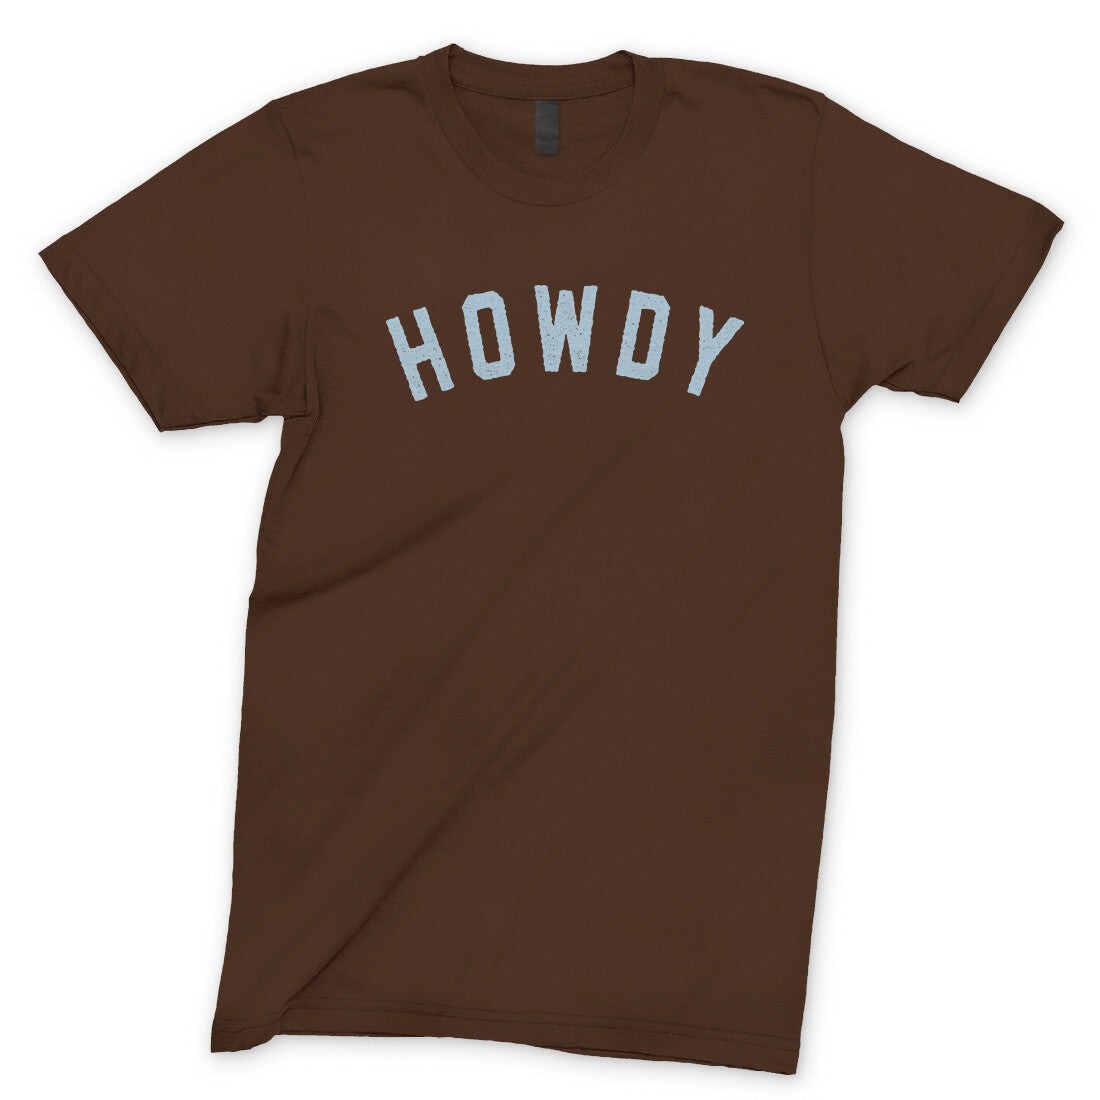 Howdy in Dark Chocolate Color